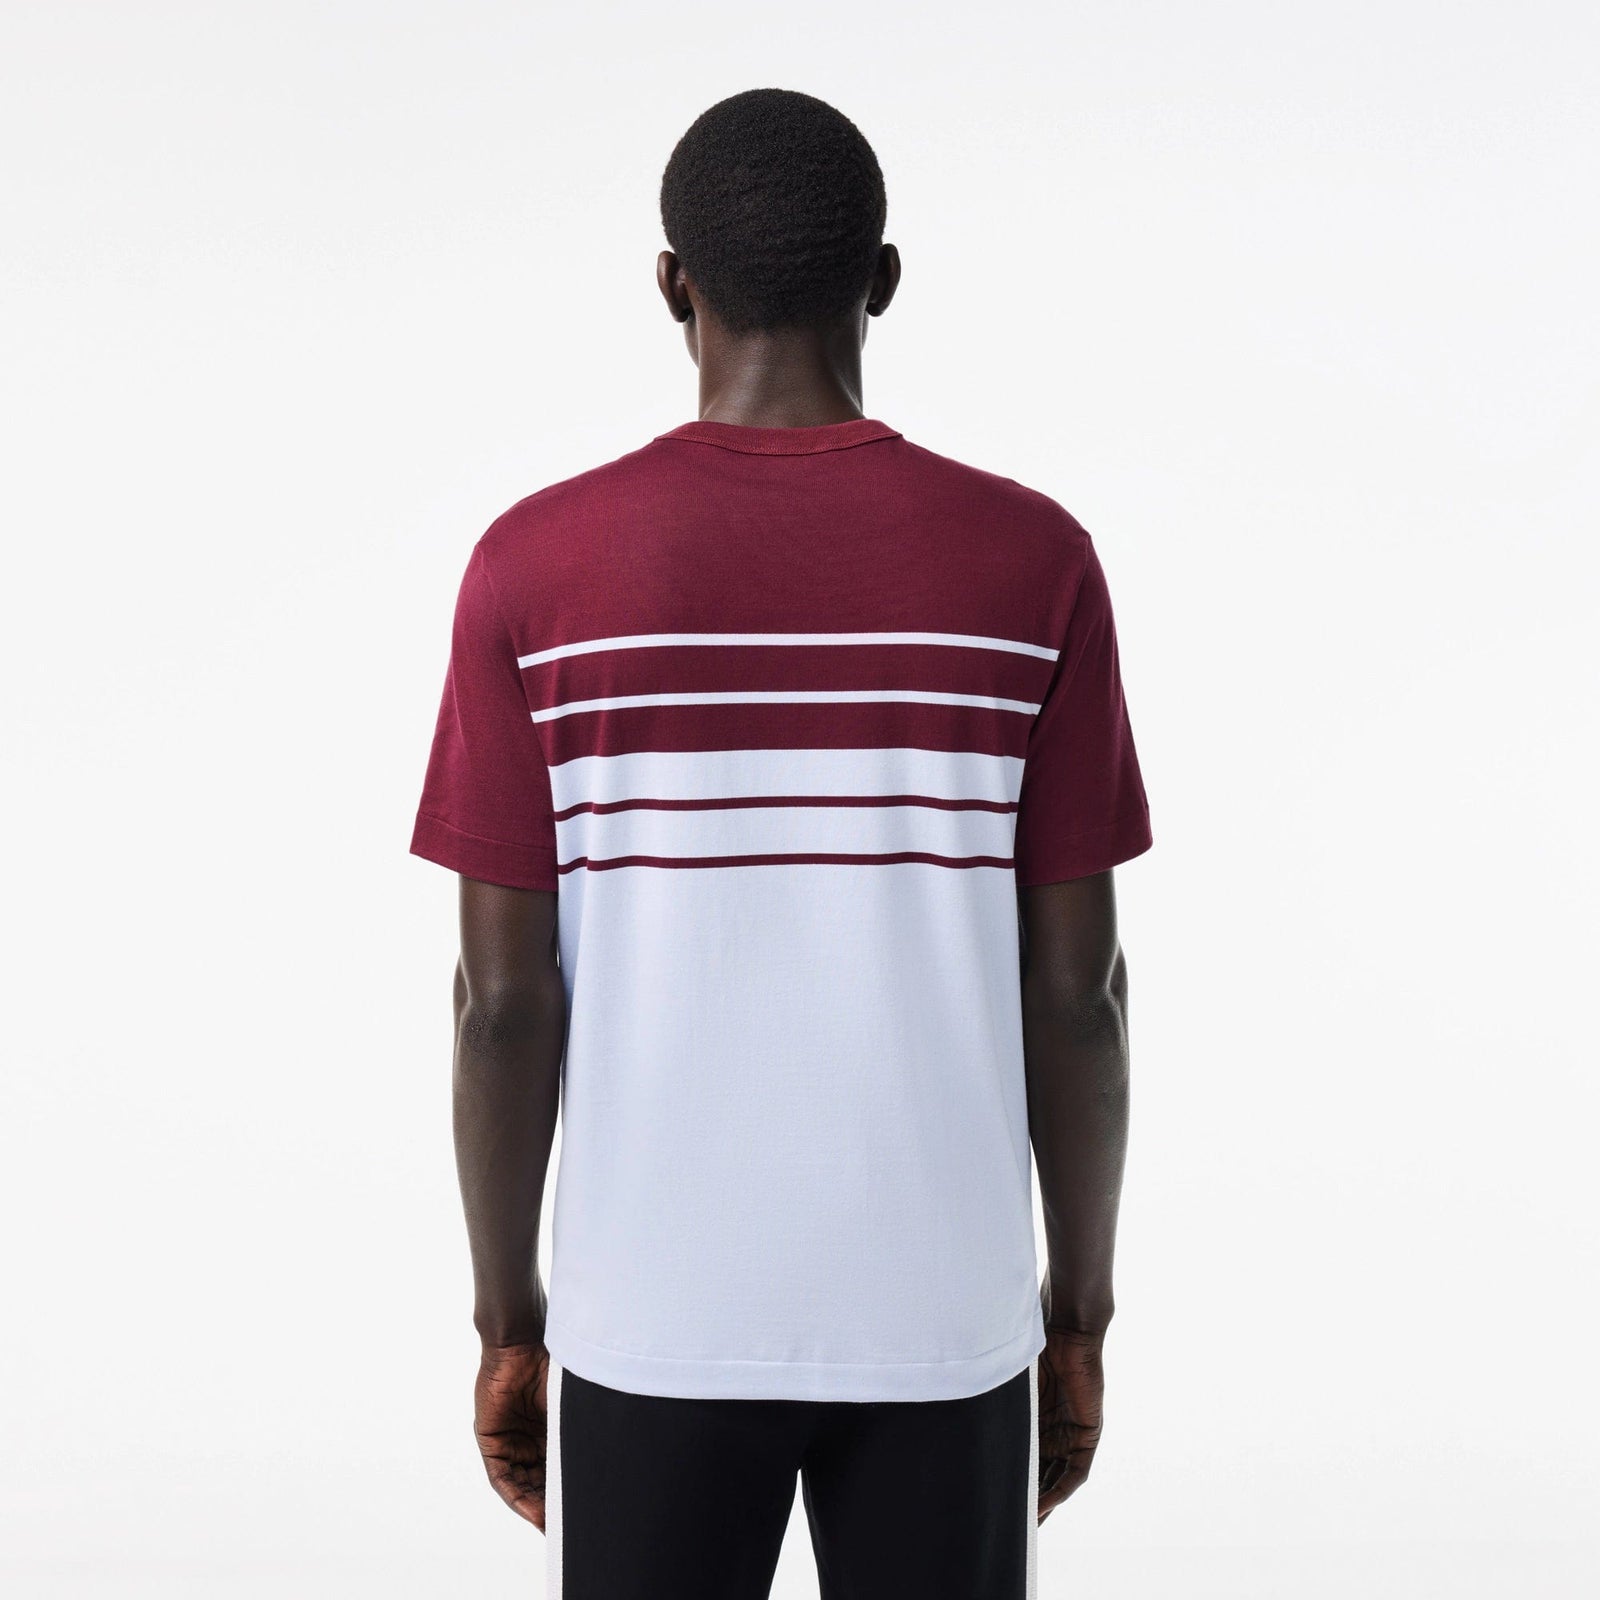 Lacoste French Made Striped Jersey T-Shirt in Light Blue/Bordeaux IT6